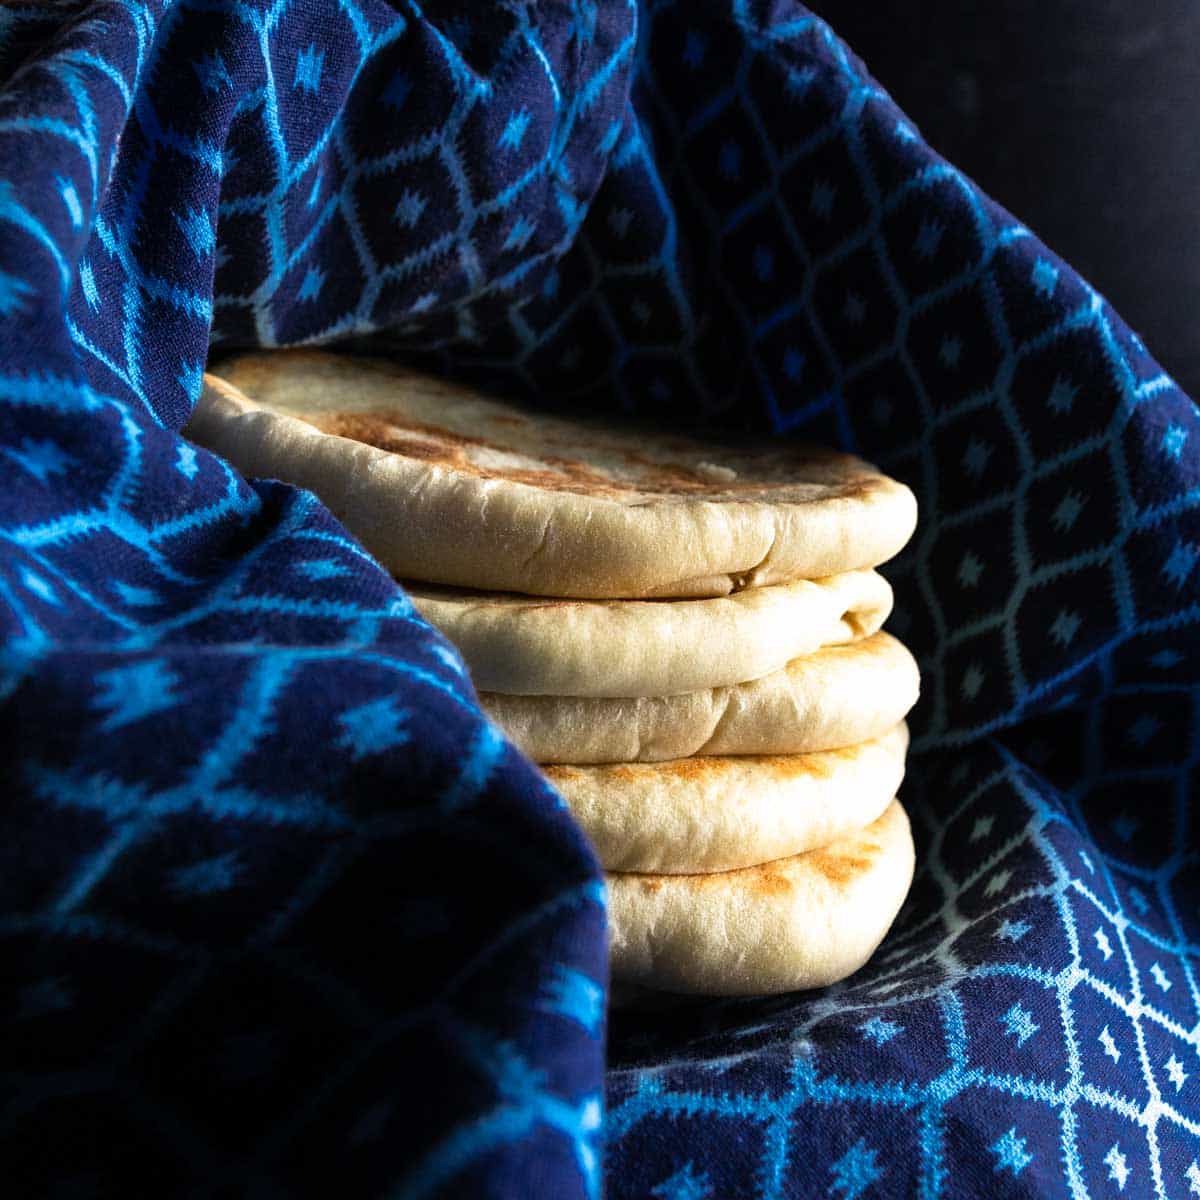 A stack of pita pockets wrapped in a clean dish towel to steam after baking